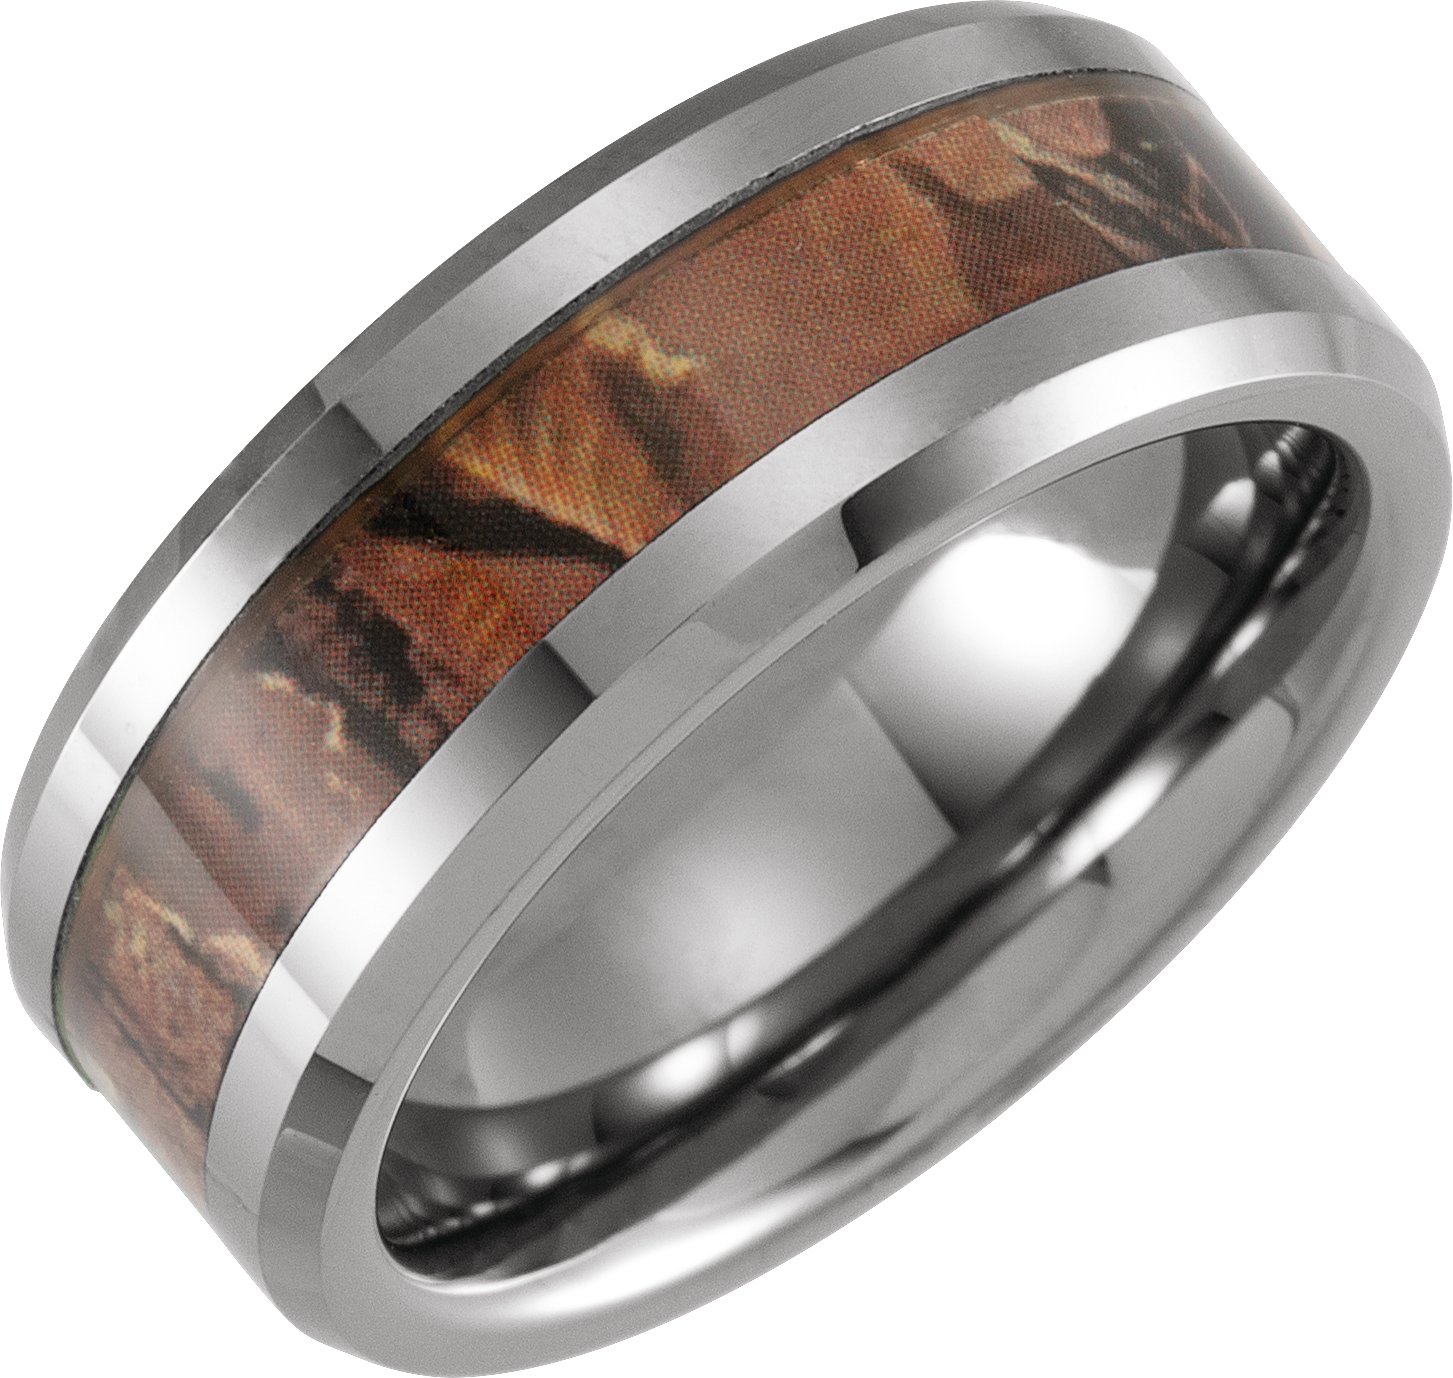 Tungsten 8 mm Beveled Band with Acacia Wood Inlay Size 13